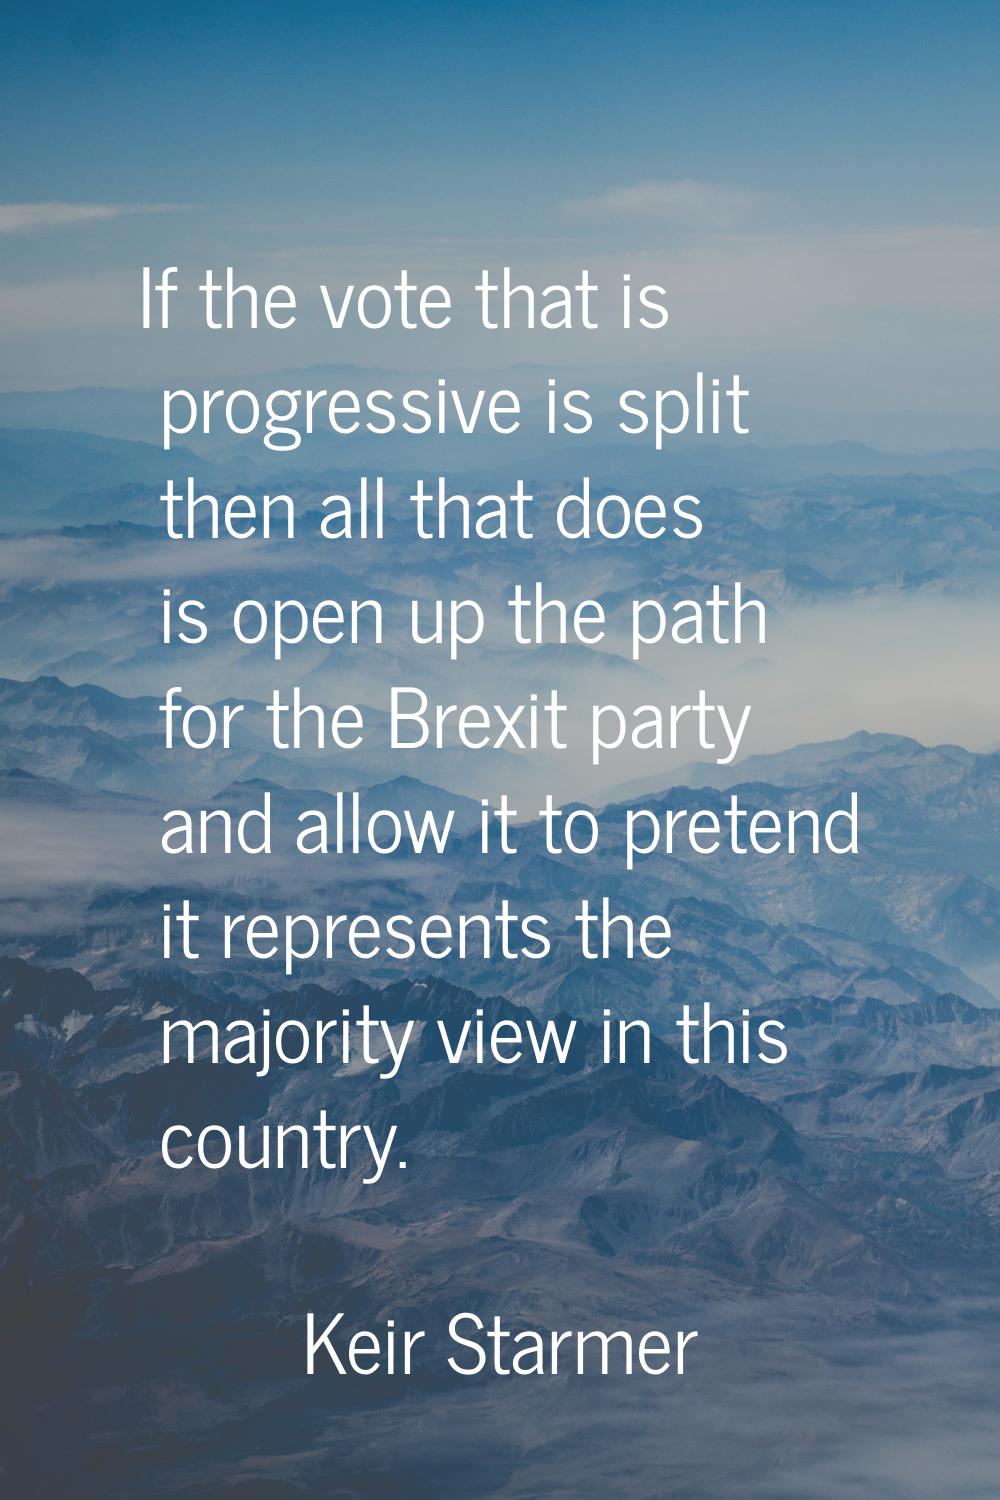 If the vote that is progressive is split then all that does is open up the path for the Brexit part